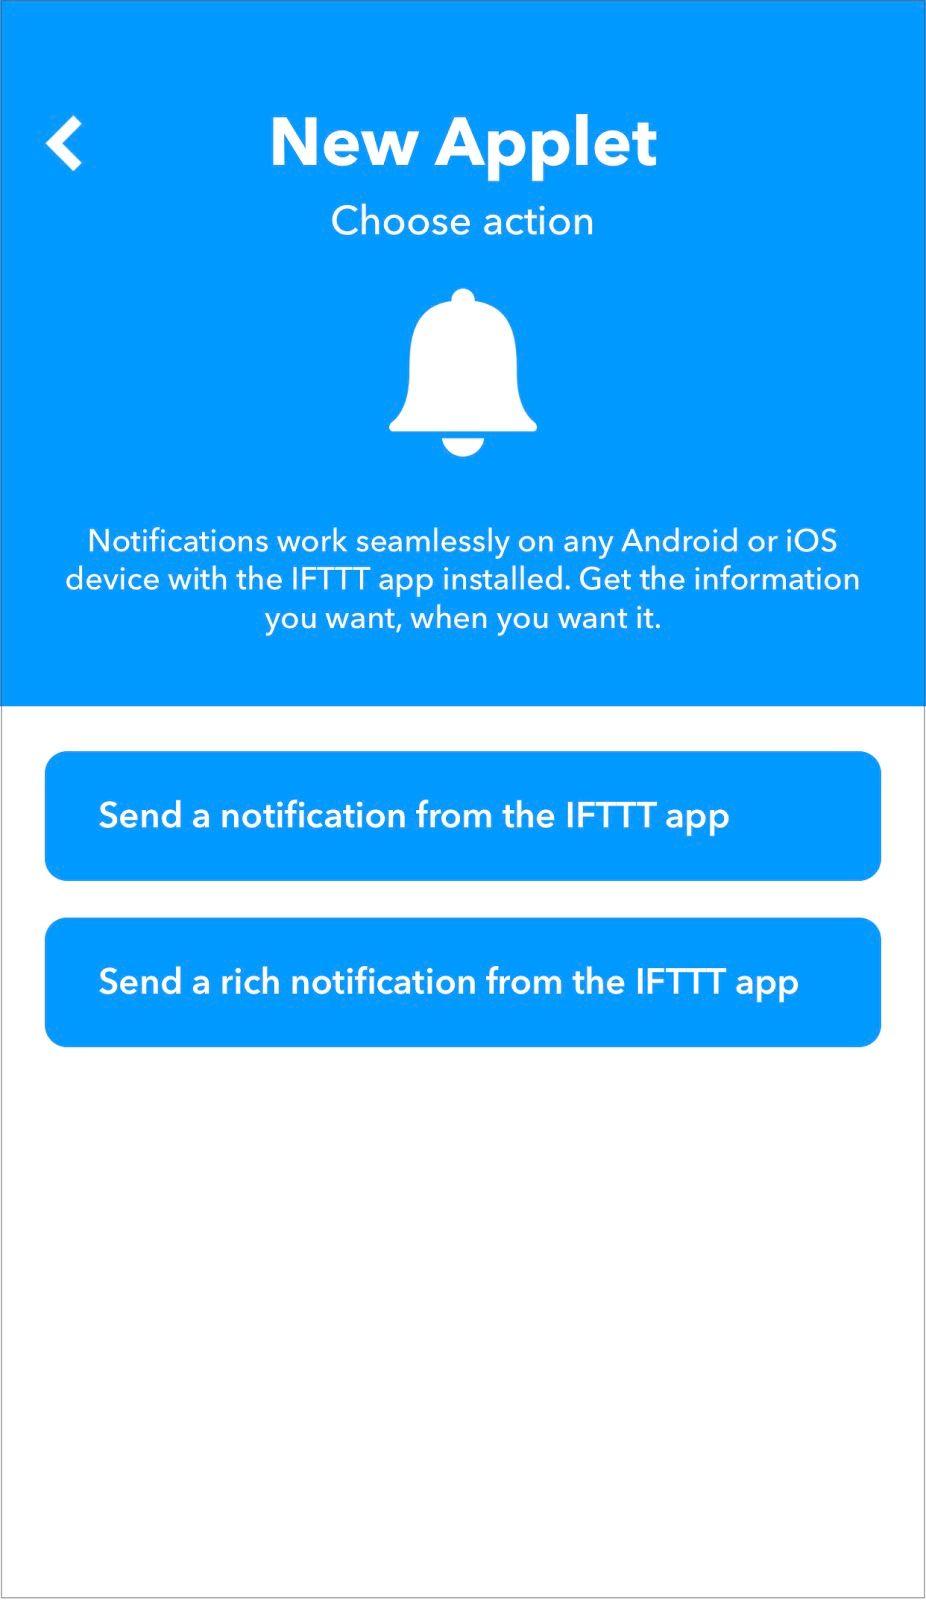 be connected on IFTTT. MicroBot Push must be connected and working.